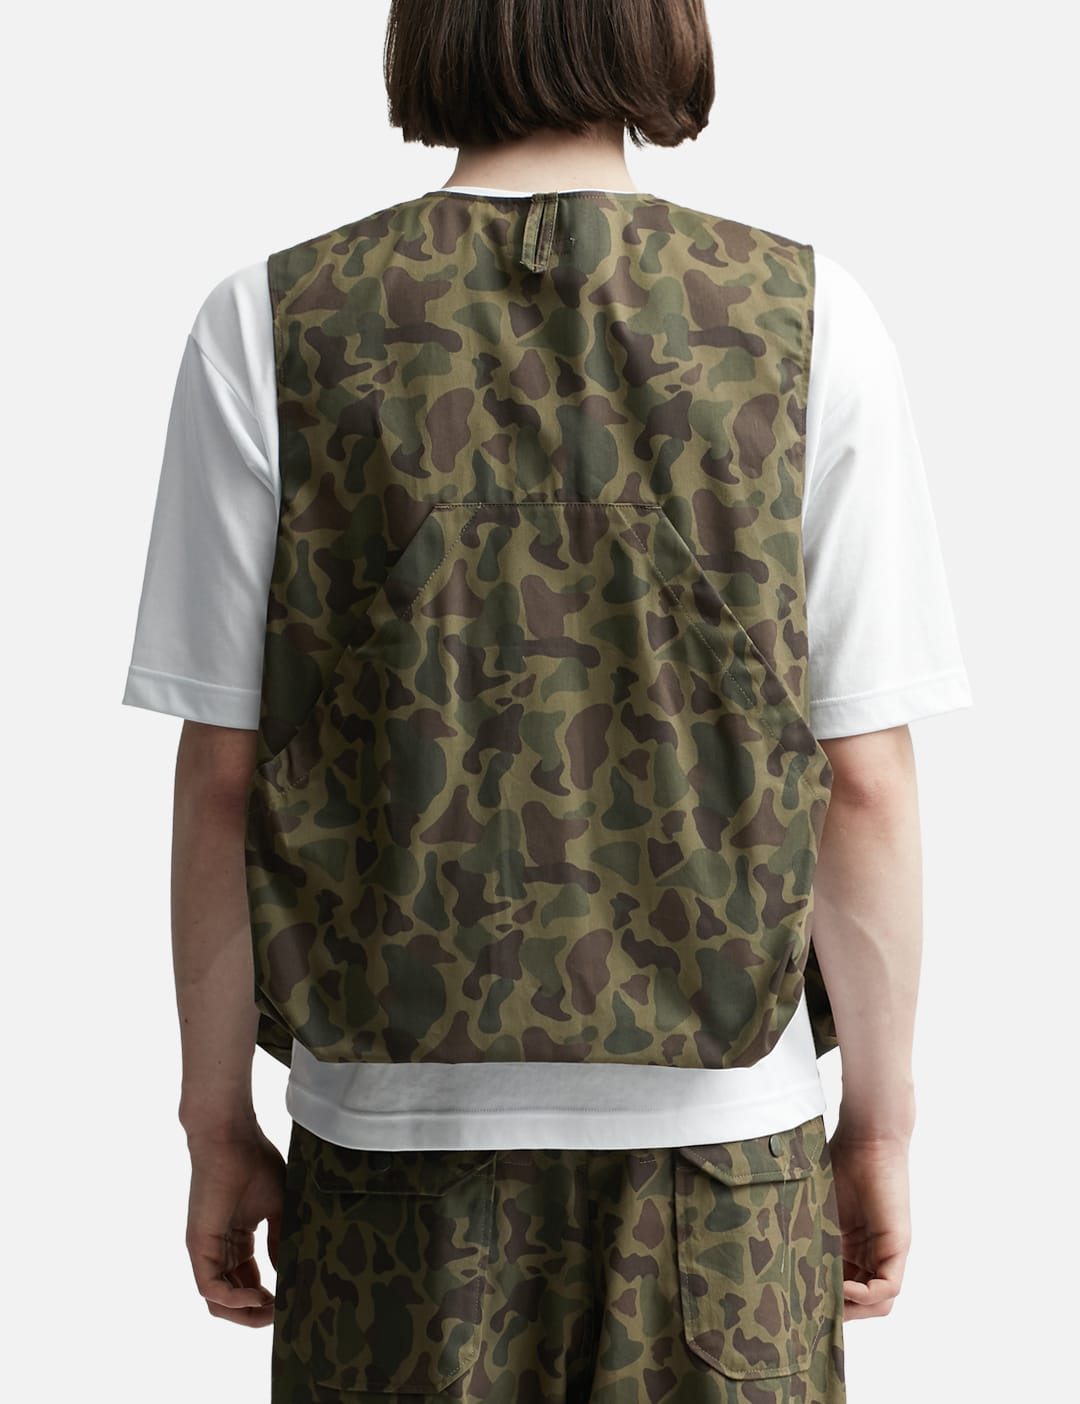 Engineered Garments   FOWL VEST   HBX   Globally Curated